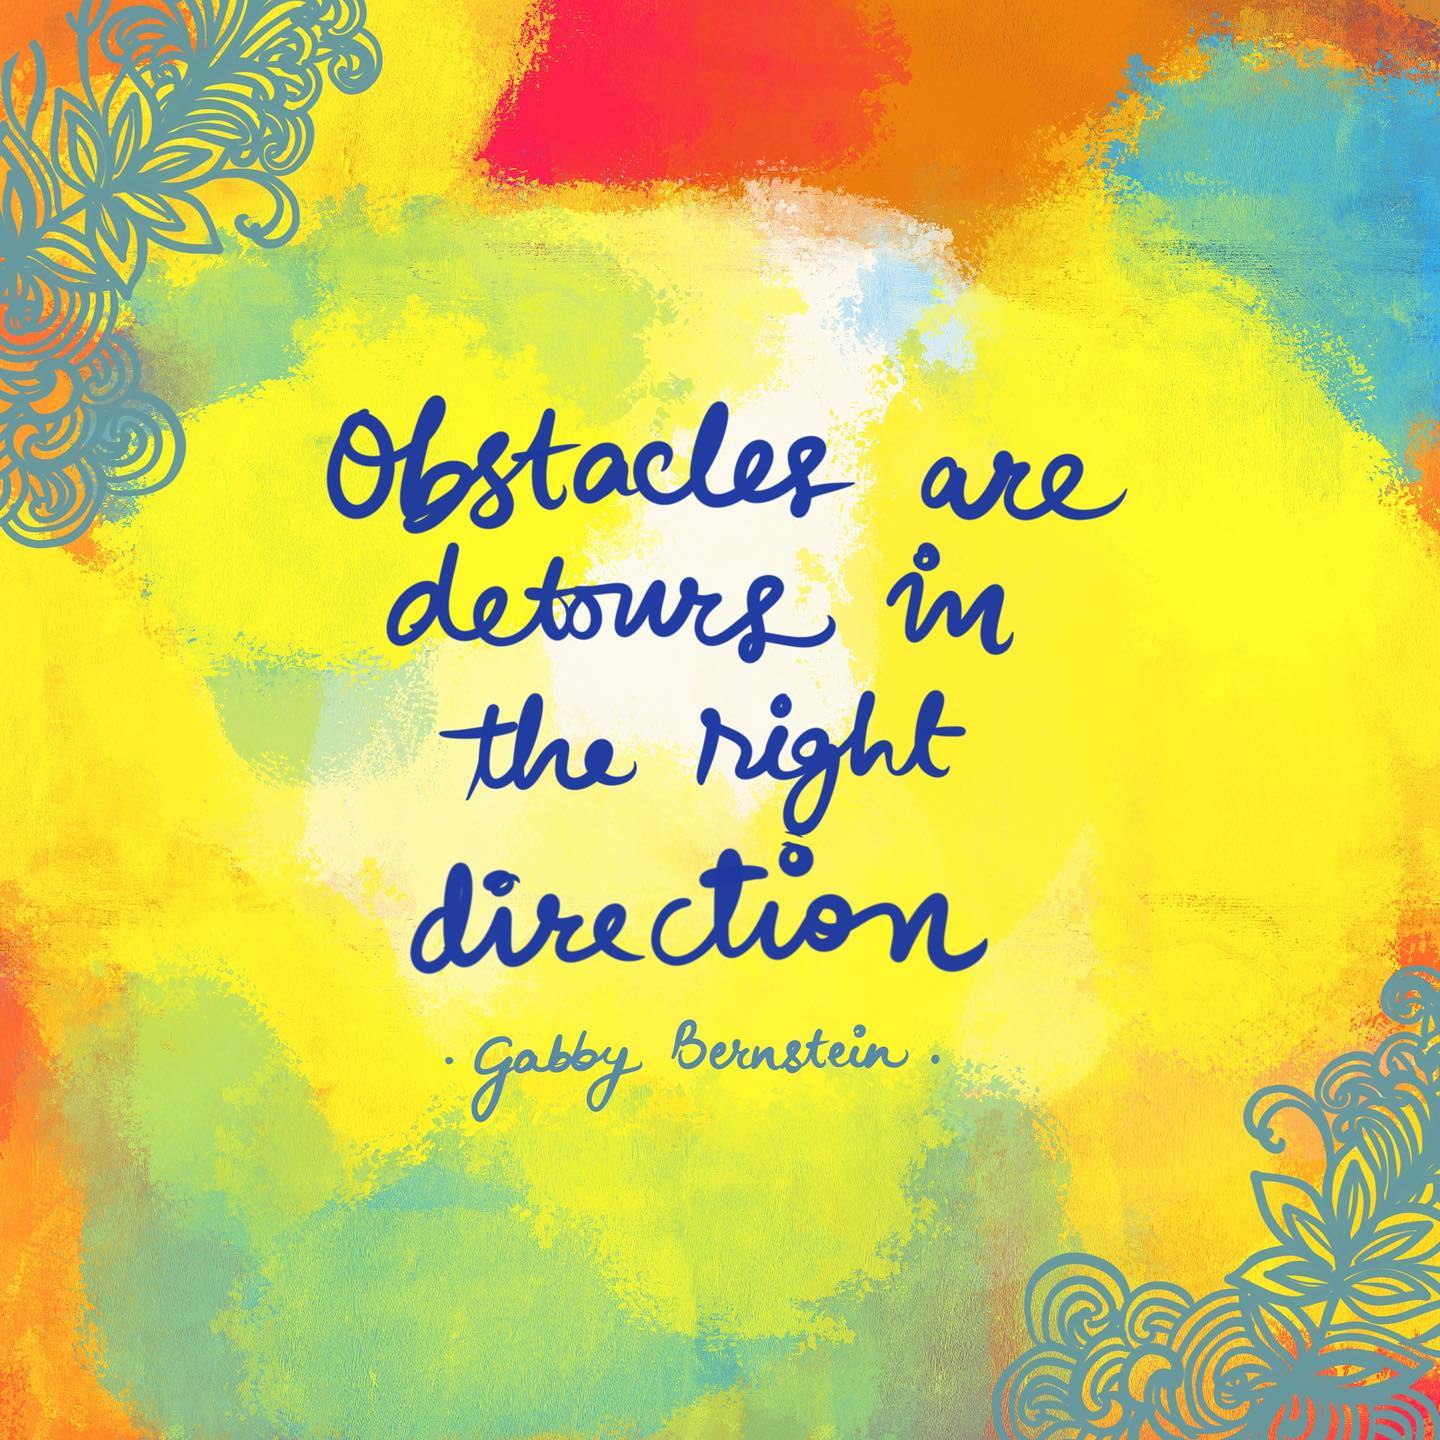 Obstacles are detours in the right direction.

@deargabbyquotes